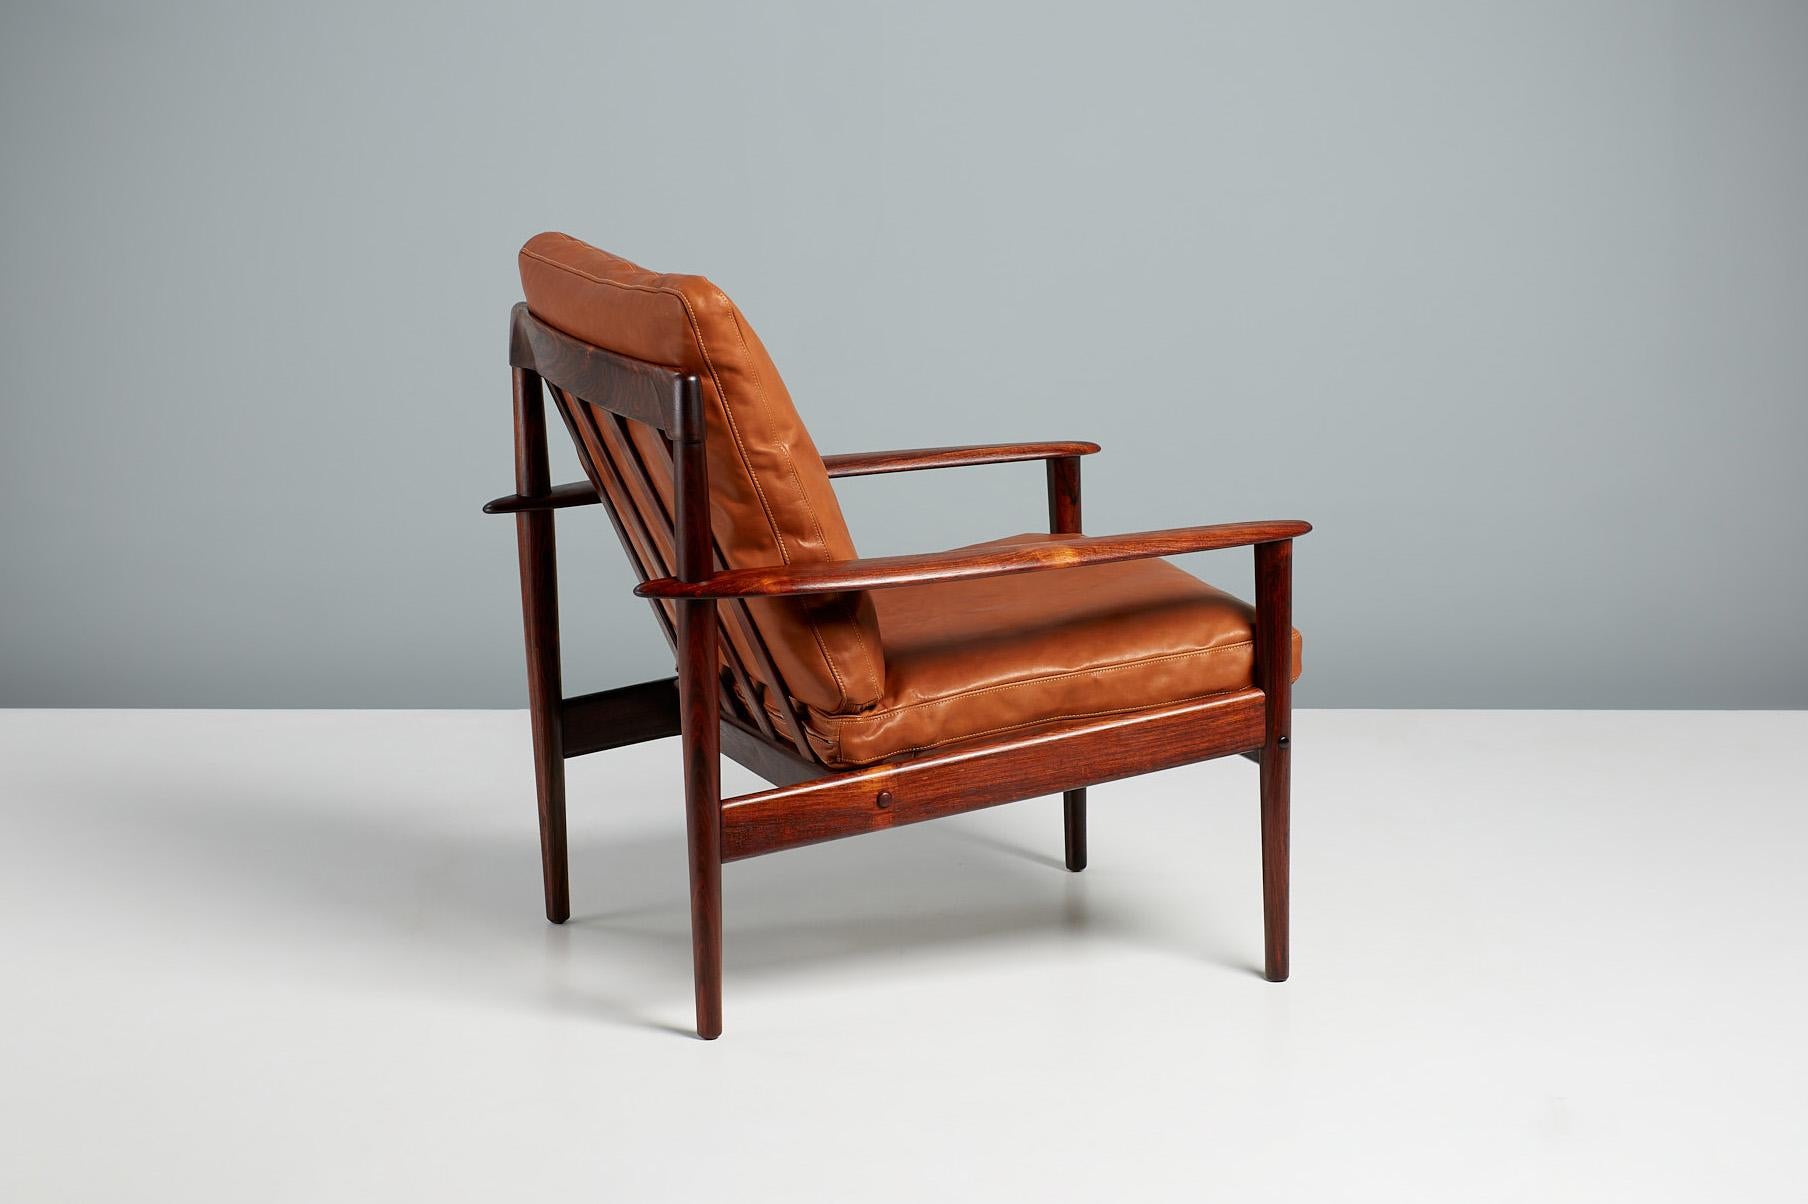 Grete Jalk Model PJ-56 lounge chair

A beautiful lounge chair designed by Grete Jalk for cabinetmaker Poul Jeppesen in Denmark, circa 1956. This examples come in stunning rosewood with a particularly unusual, exotic grain. The chair comes with